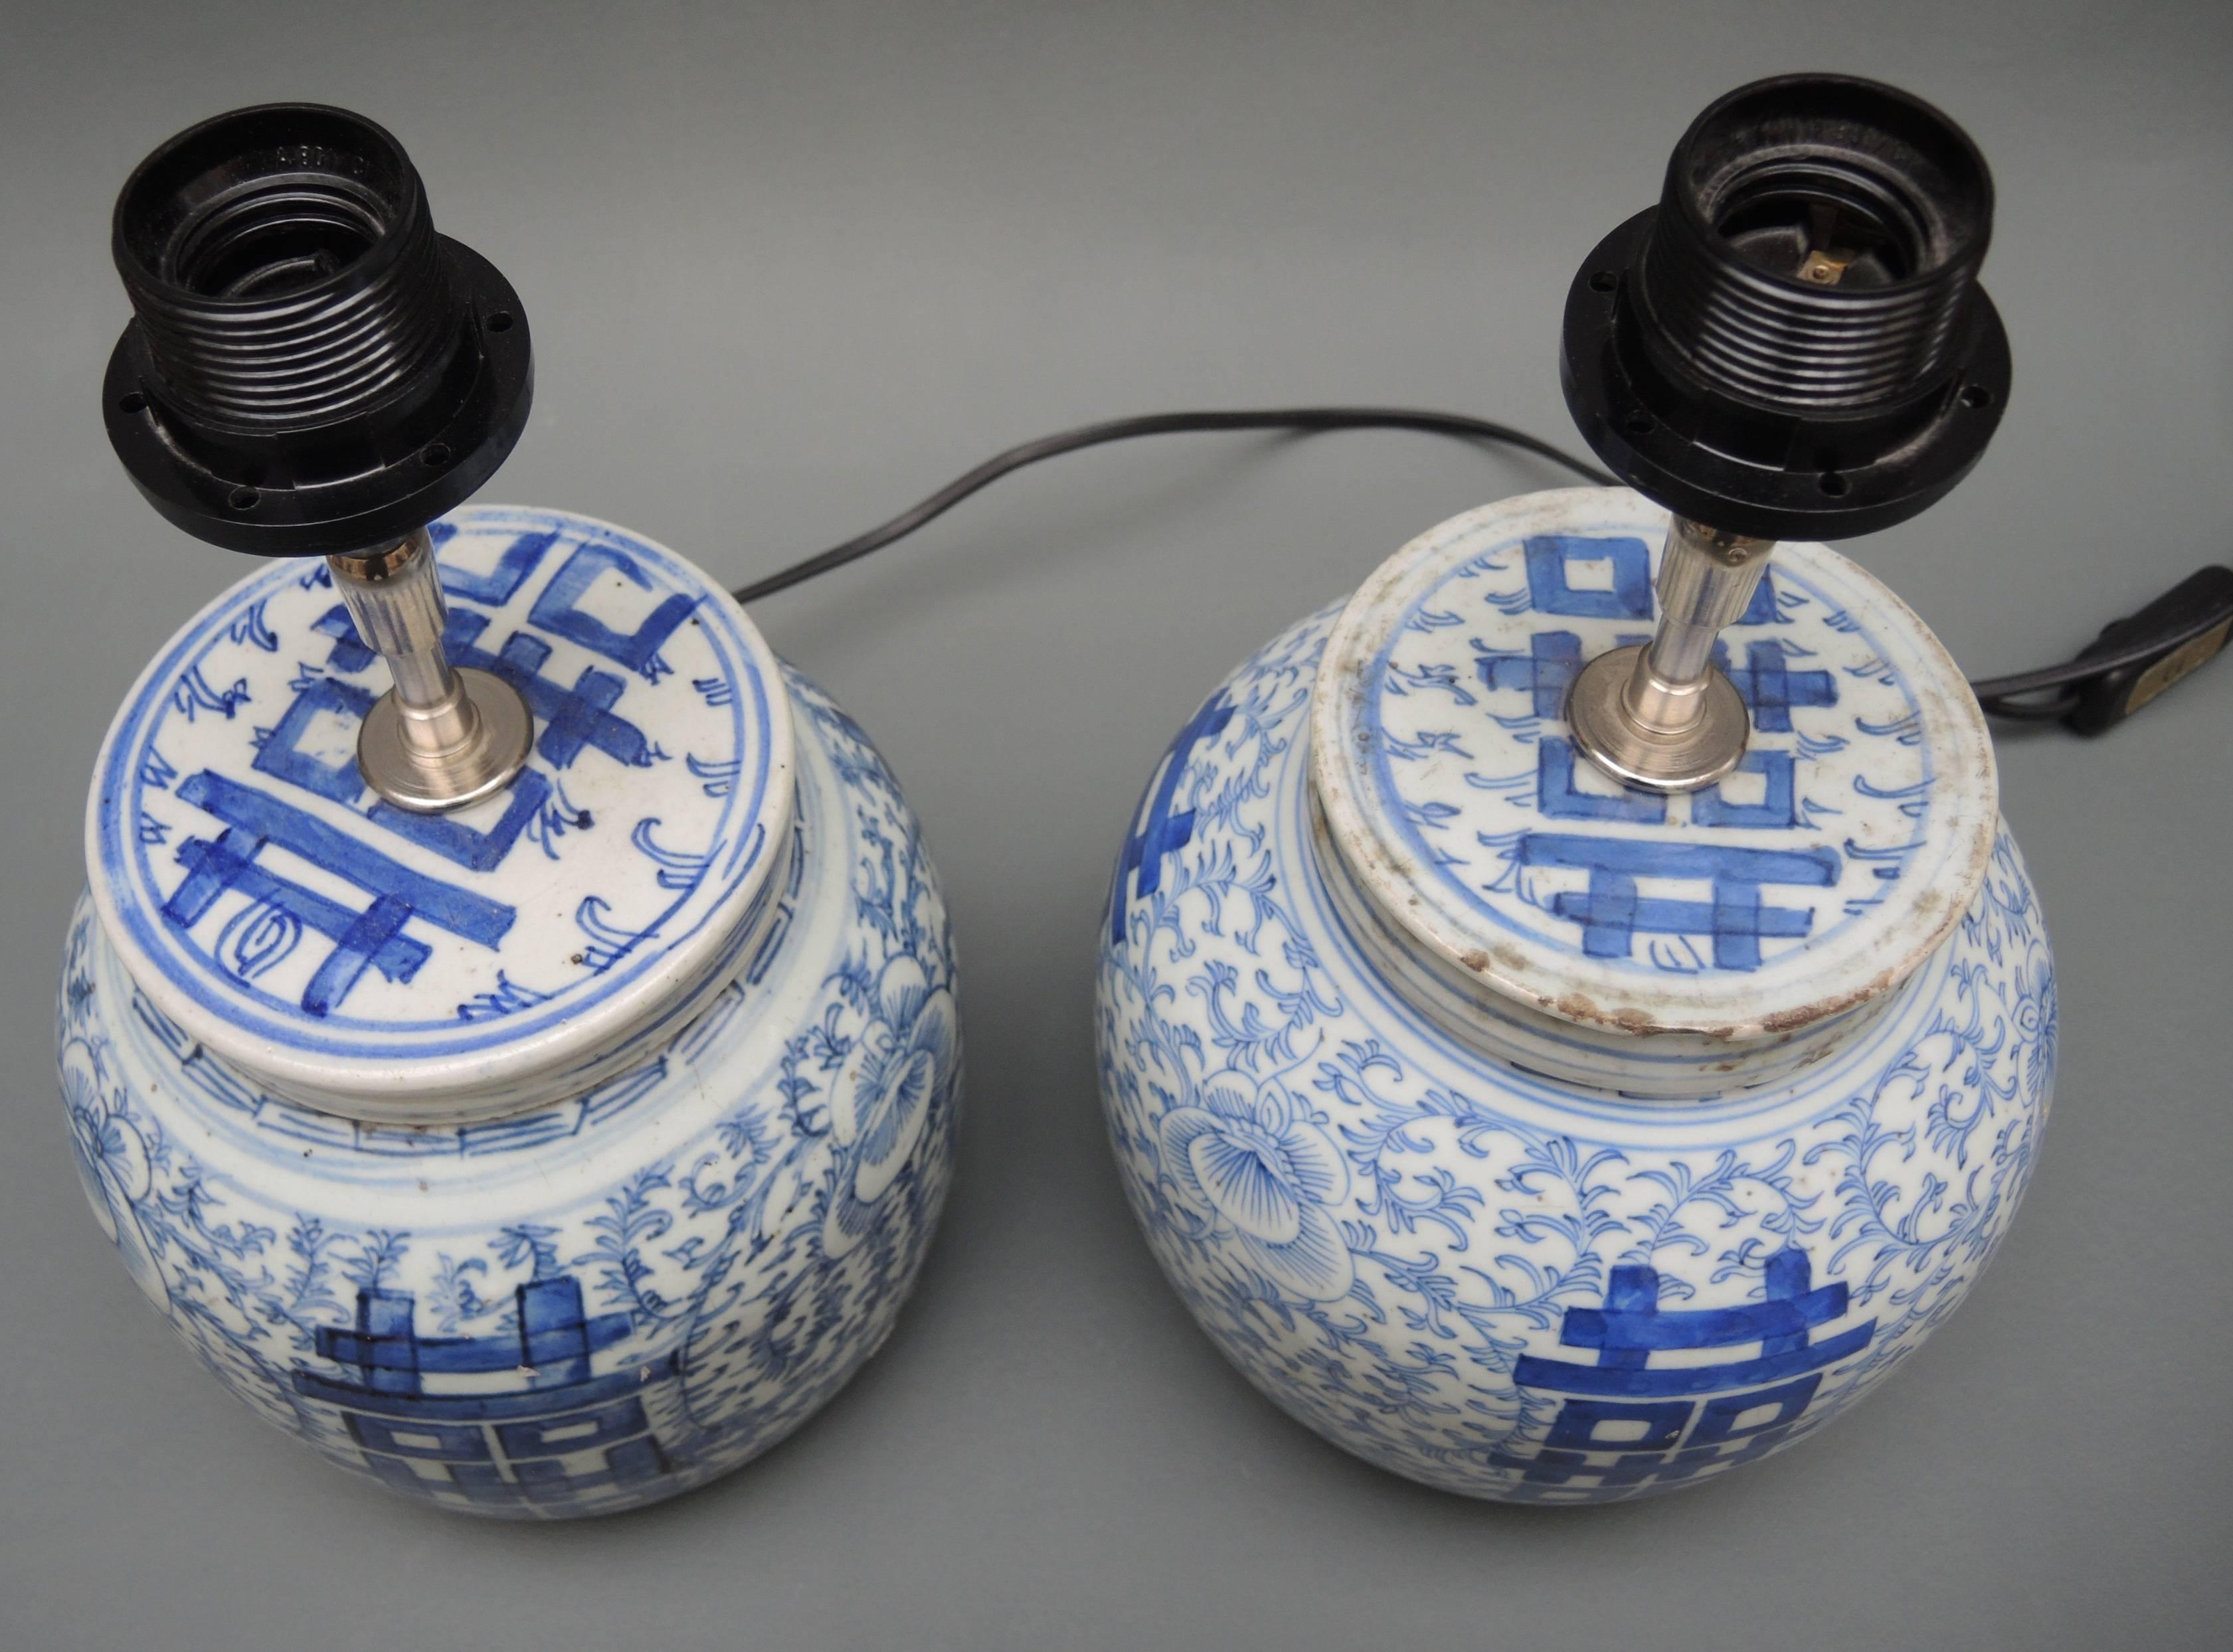 A pair of antique circa 1900 blue and white Chinese ginger jars that have been made into lamps.